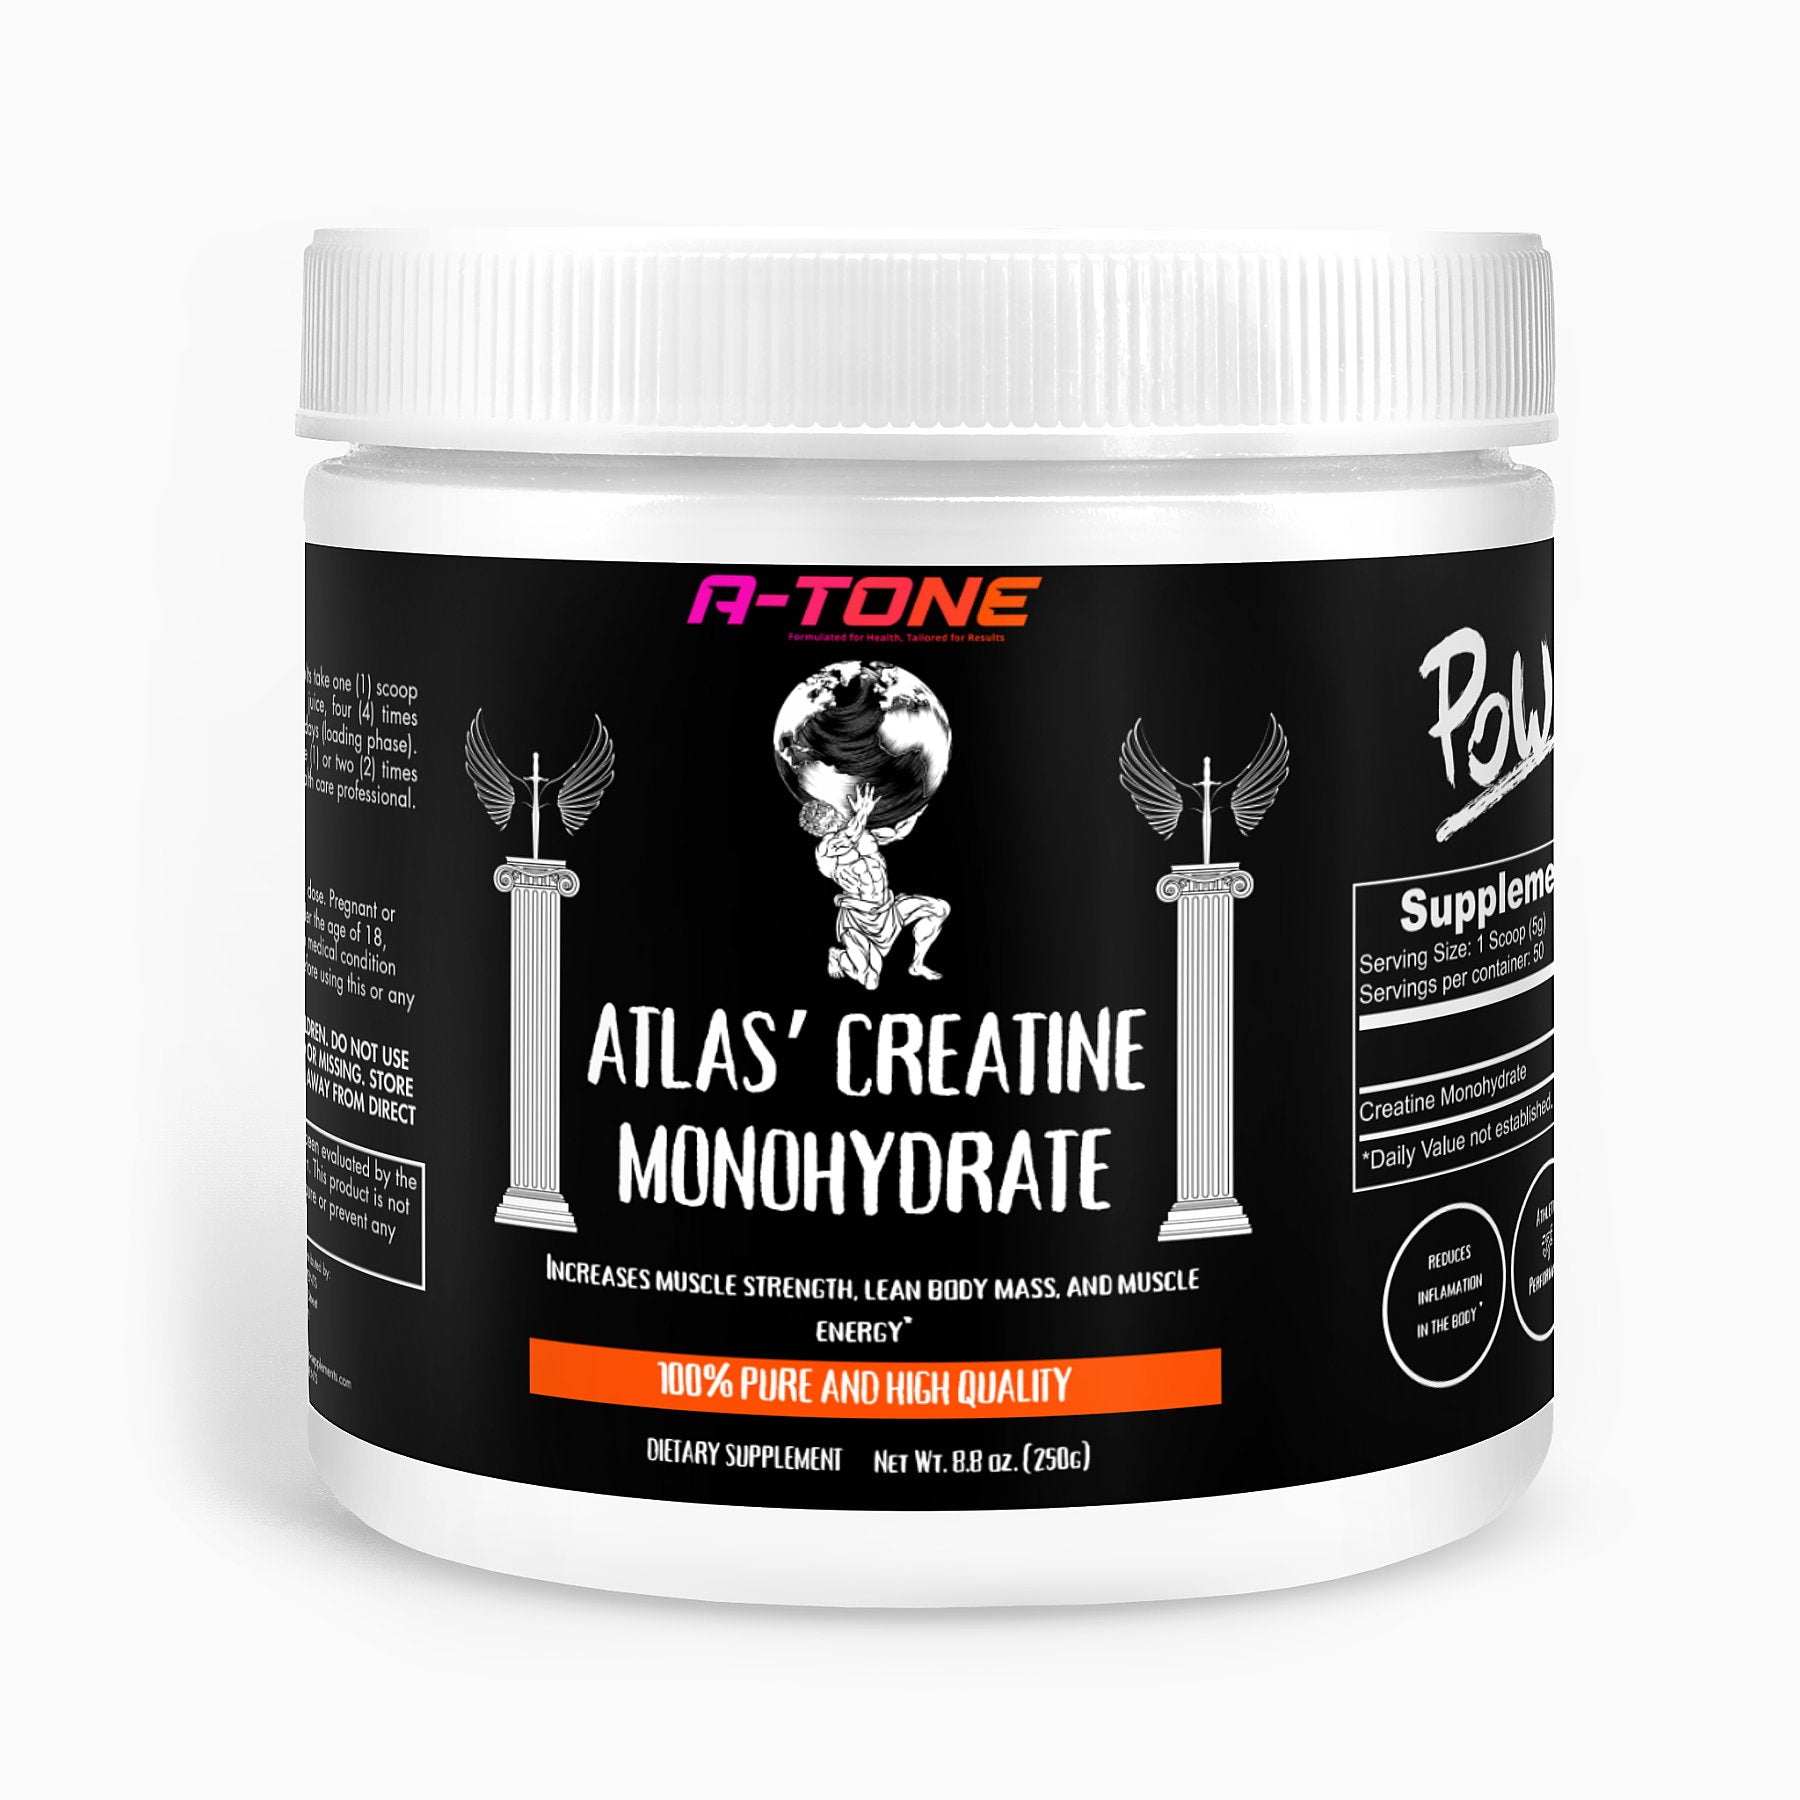 Atlas' Creatine Monohydrate - A-TONE SUPPLEMENTS - A-TONE SUPPLEMENTS